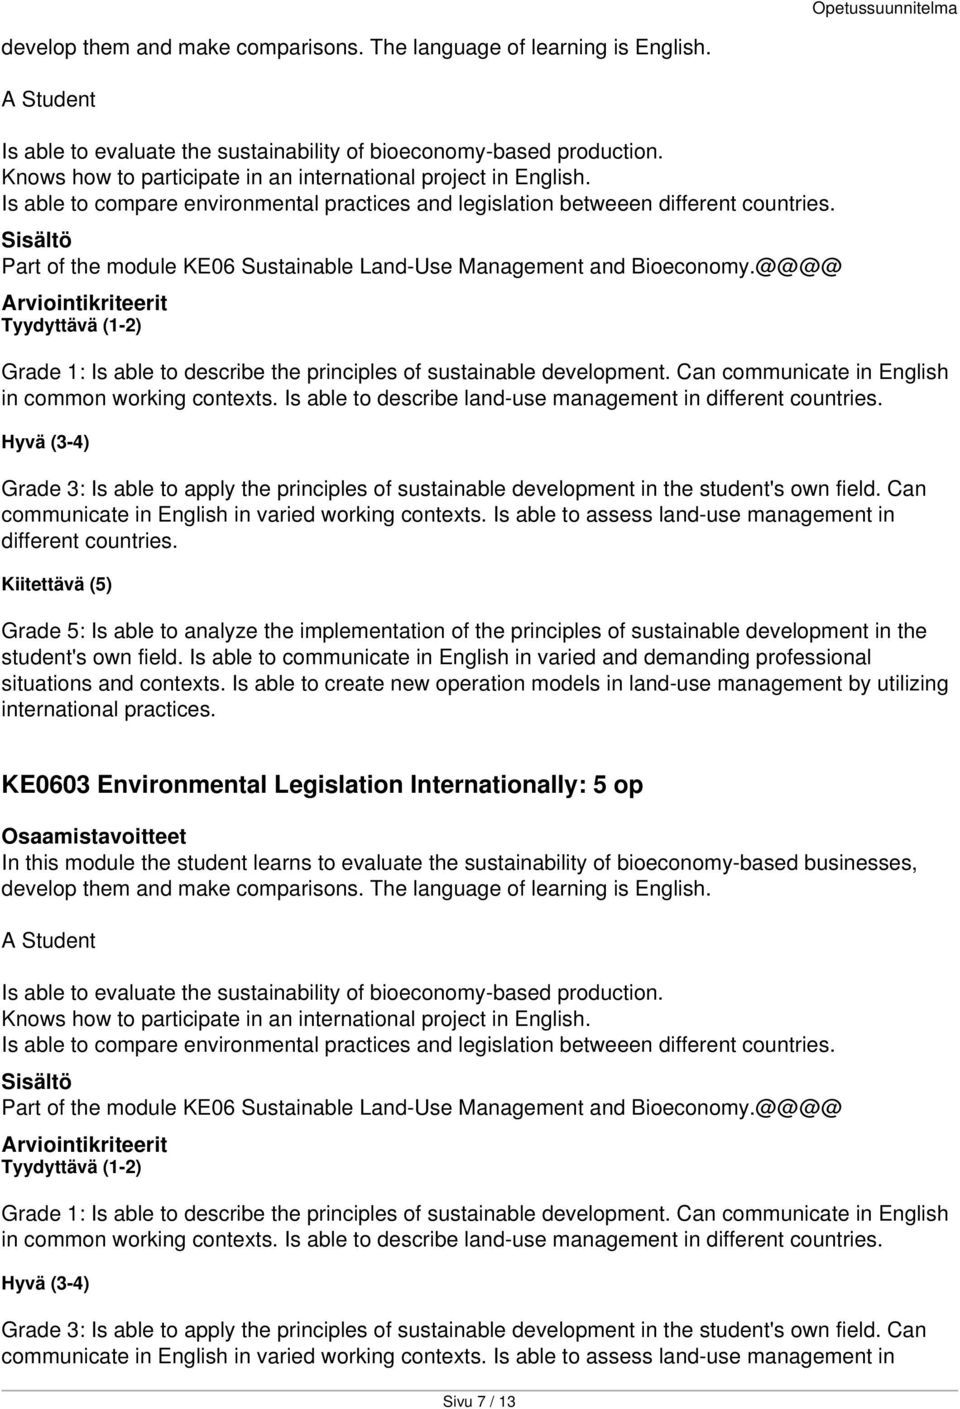 Part of the module KE06 Sustainable Land-Use Management and Bioeconomy.@@@@ Grade 1: Is able to describe the principles of sustainable development.